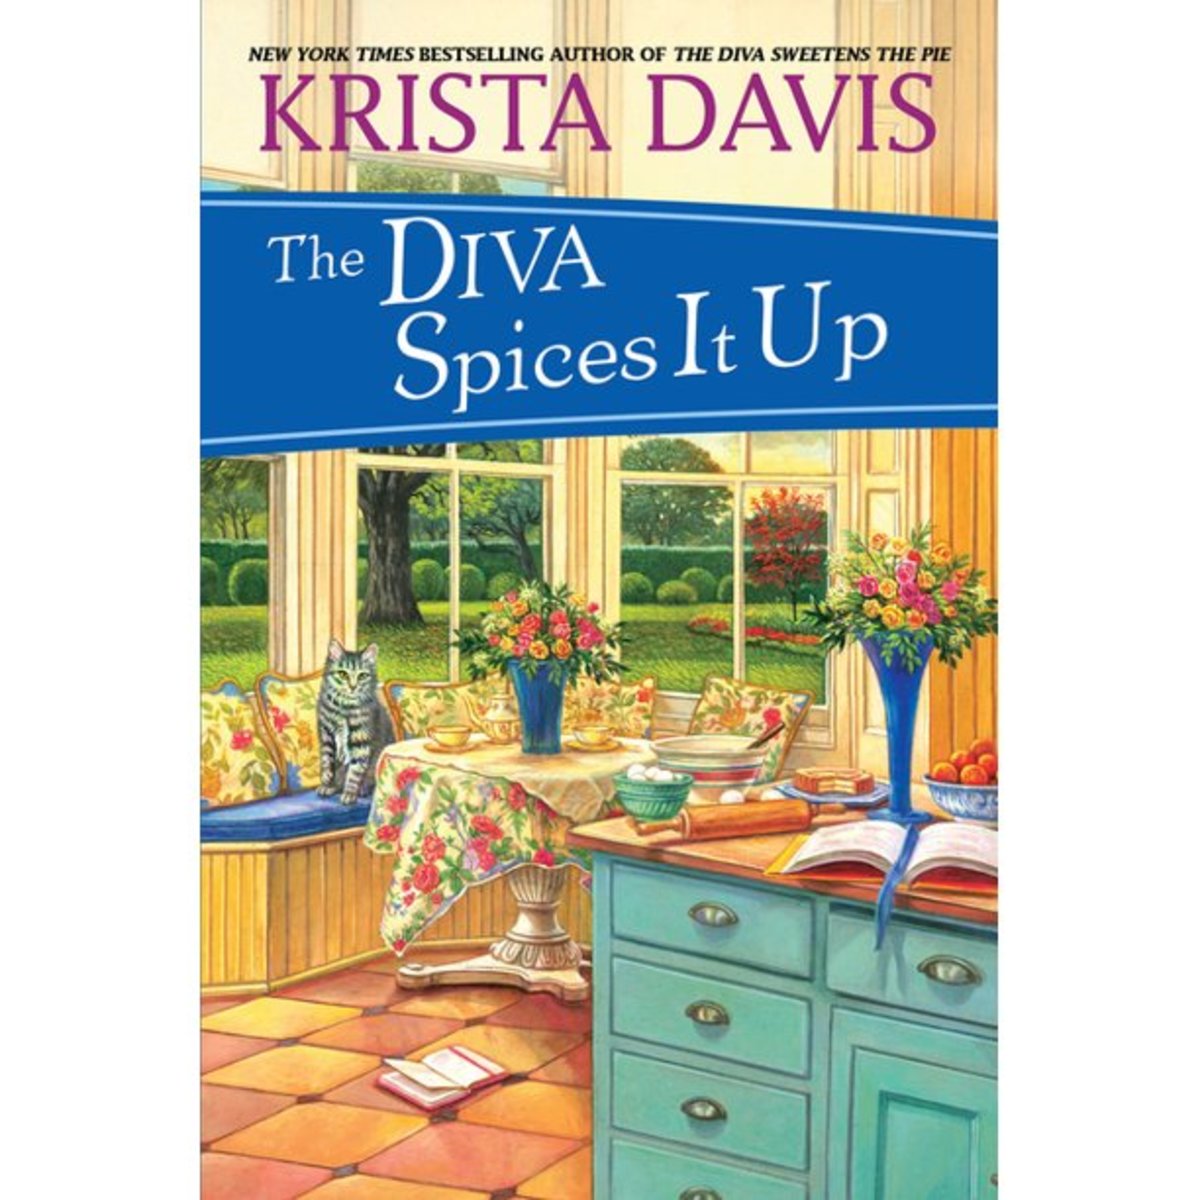 Book Review: The Diva Spices It Up by Krista Davis